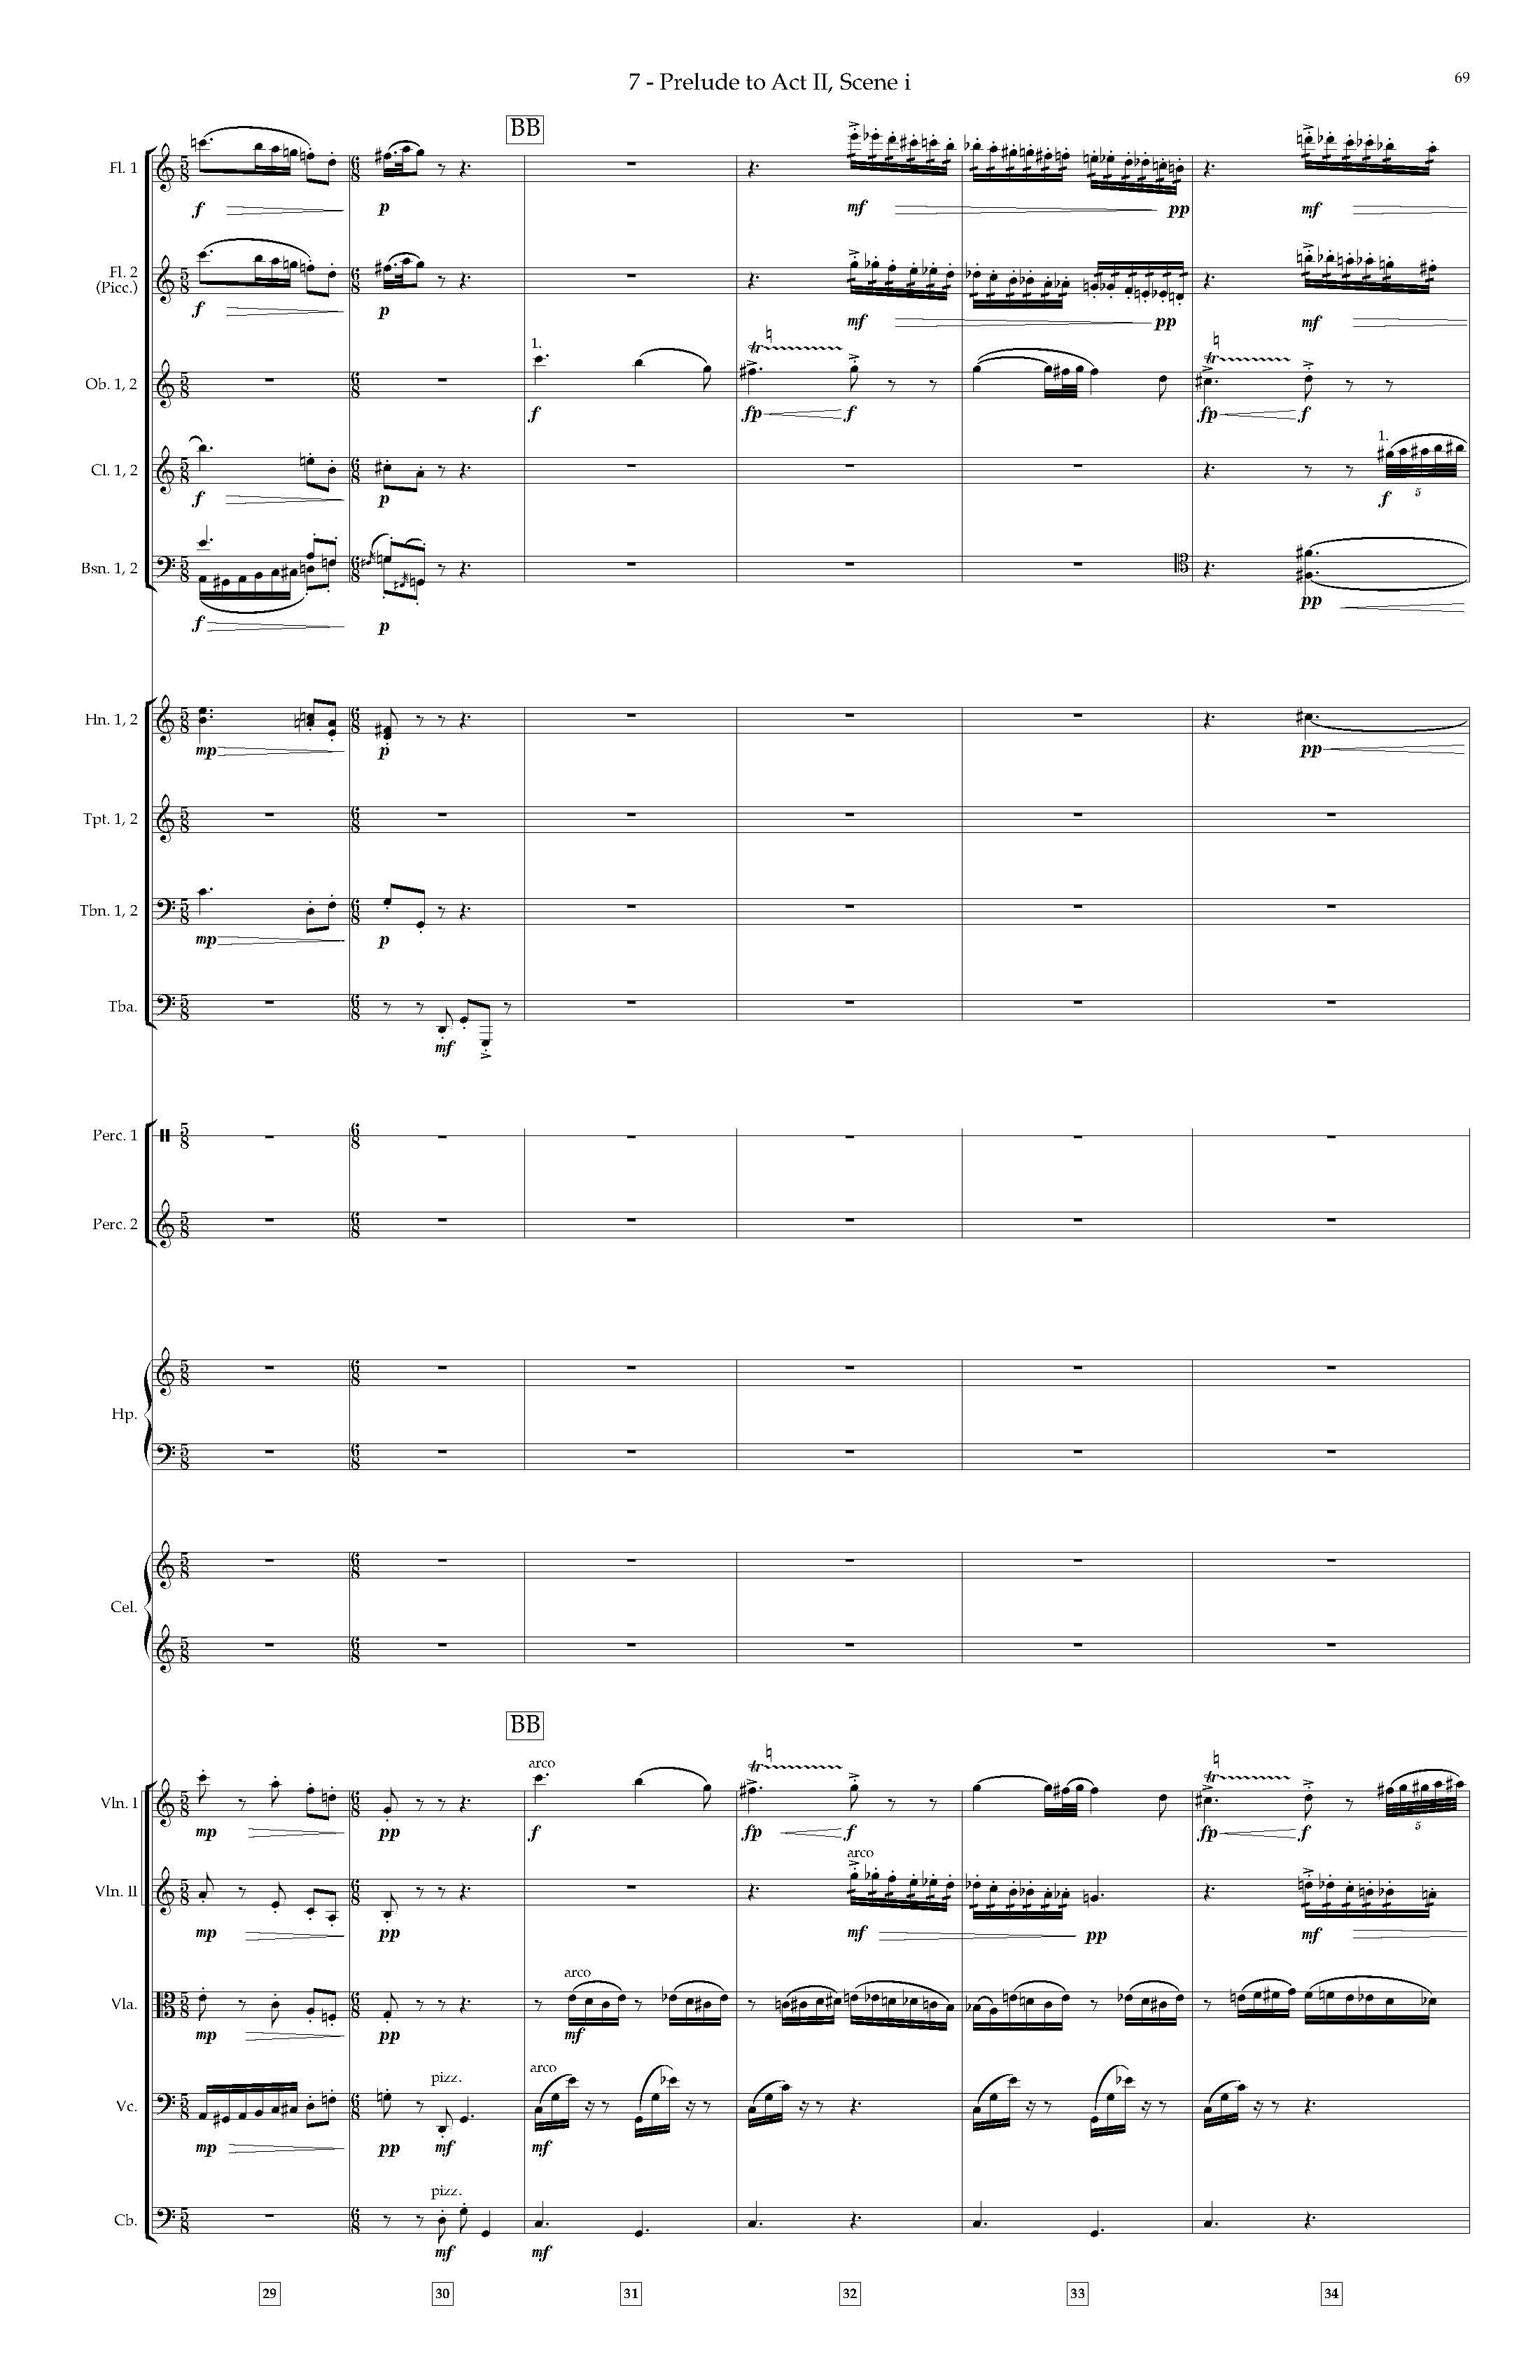 Arias and Interludes from HWGS - Complete Score_Page_75.jpg